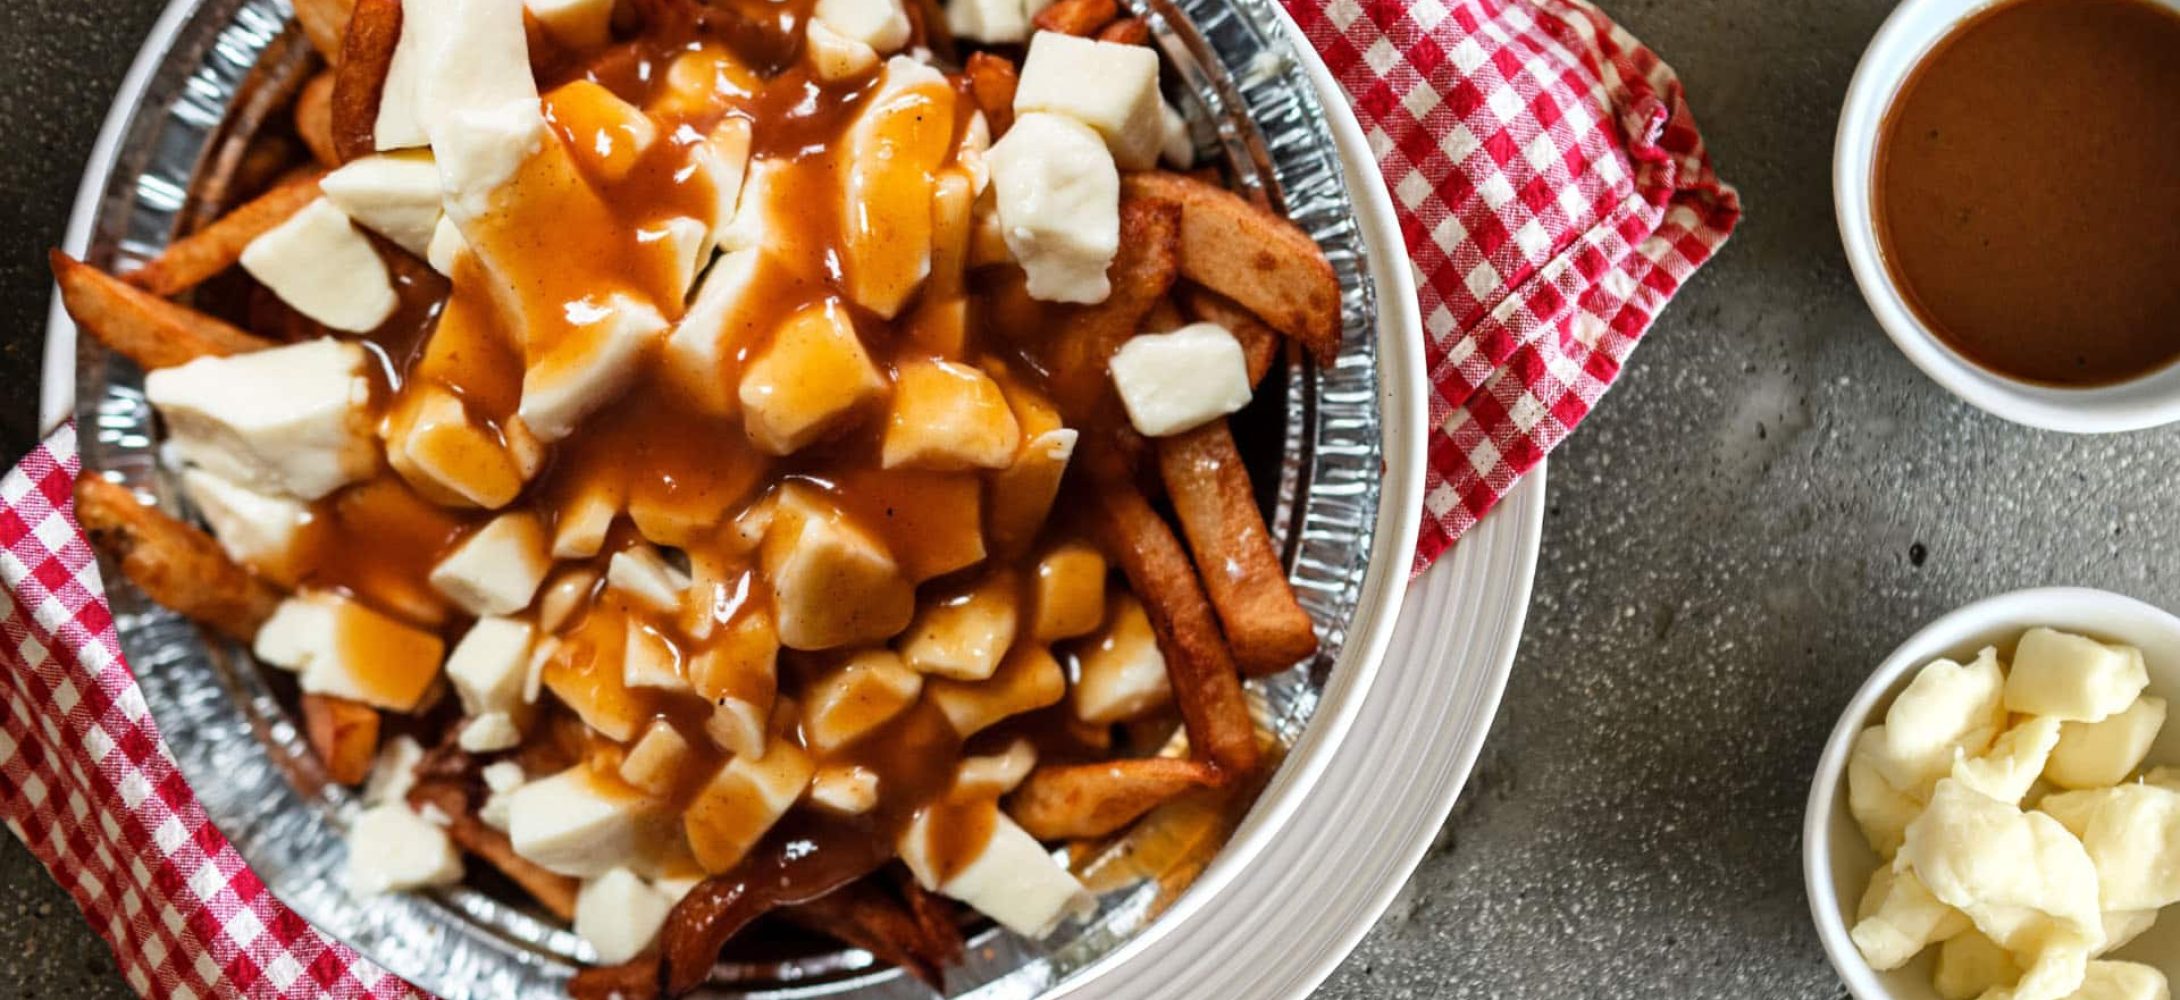 Poutine delivery order online best pizza